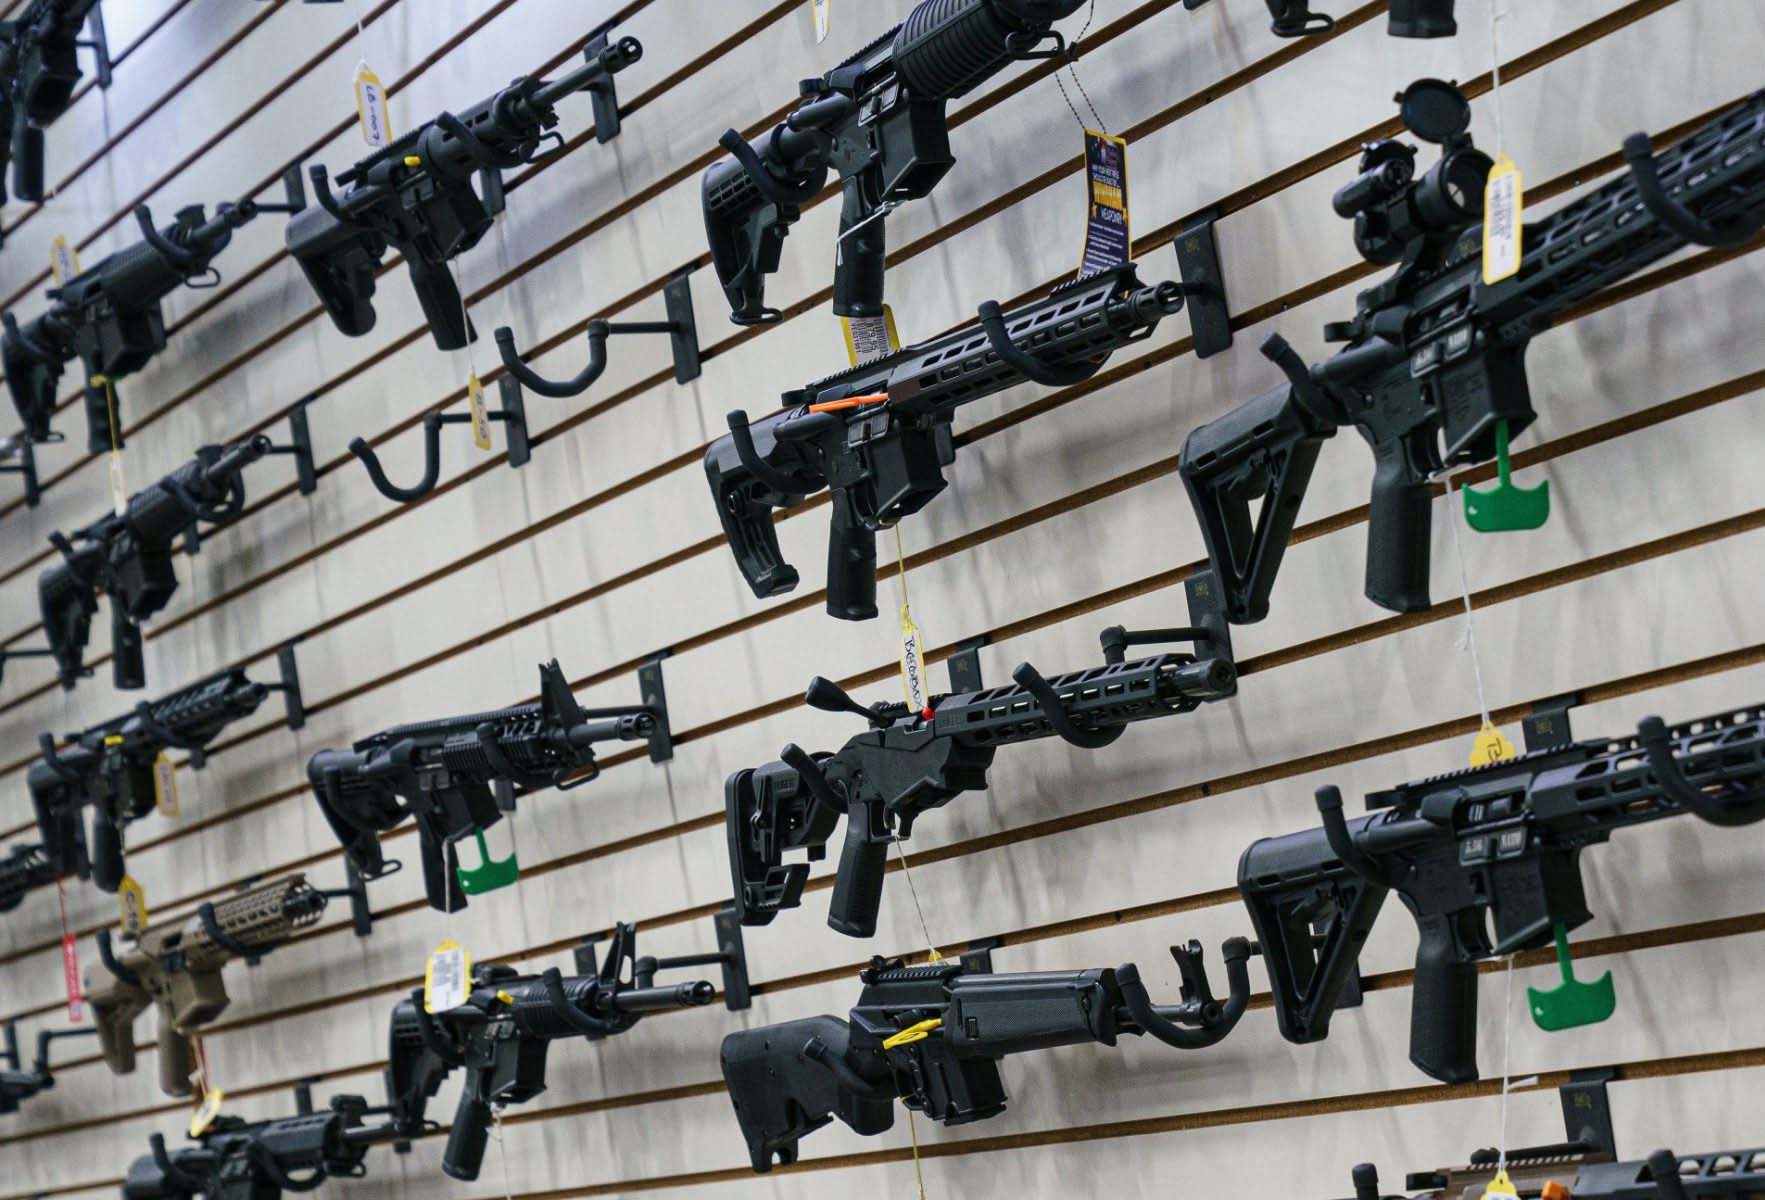 Concerns Of Rising Antisemitism Prompt Jewish Americans And Israelis In L.A. To Purchase Firearms